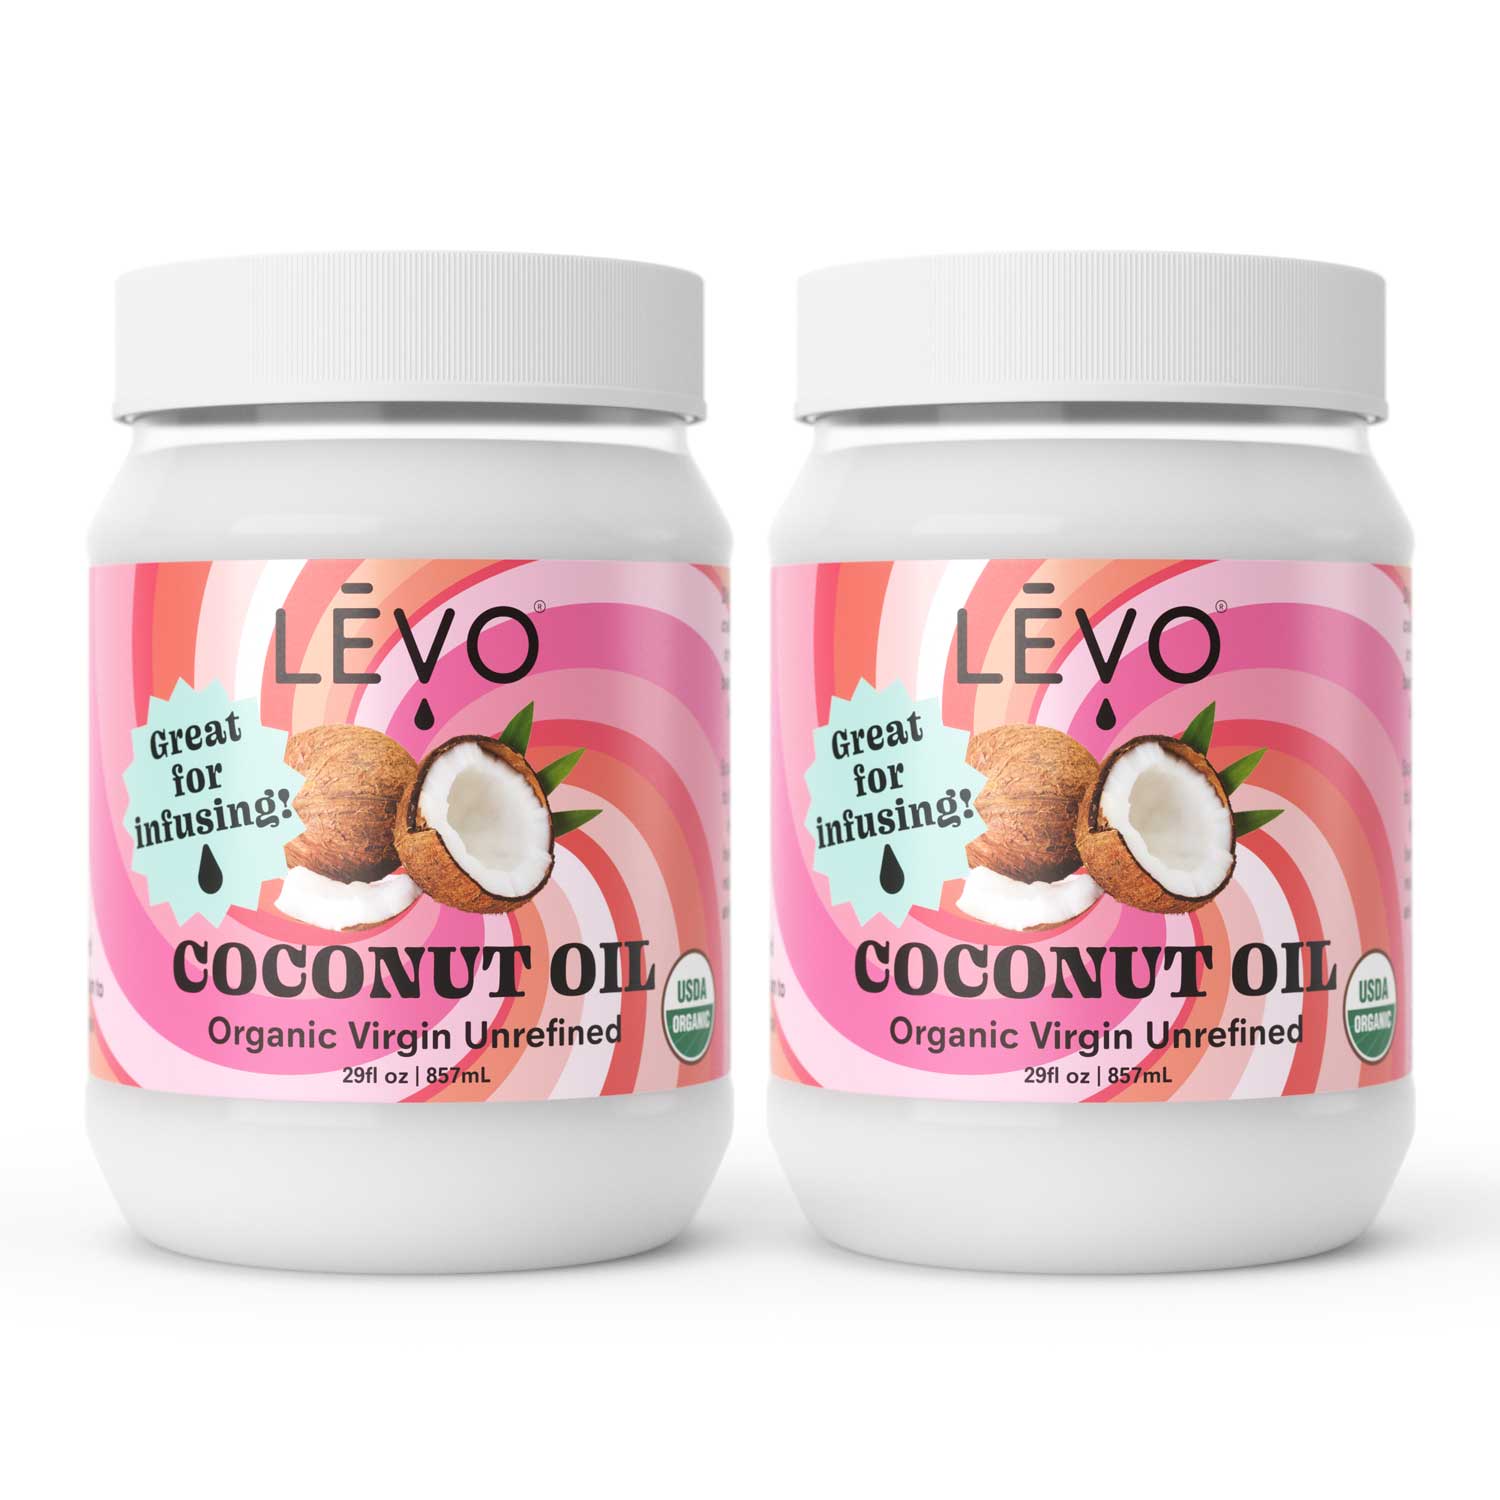 LEVO Coconut Oil is Organic, virgin, and unrefined. It's great for infusing and has a nice coconut taste. Certified Organic for all your healthy infusions with LEVO II. The 29 oz jar will fill almost 2 reservoirs full.